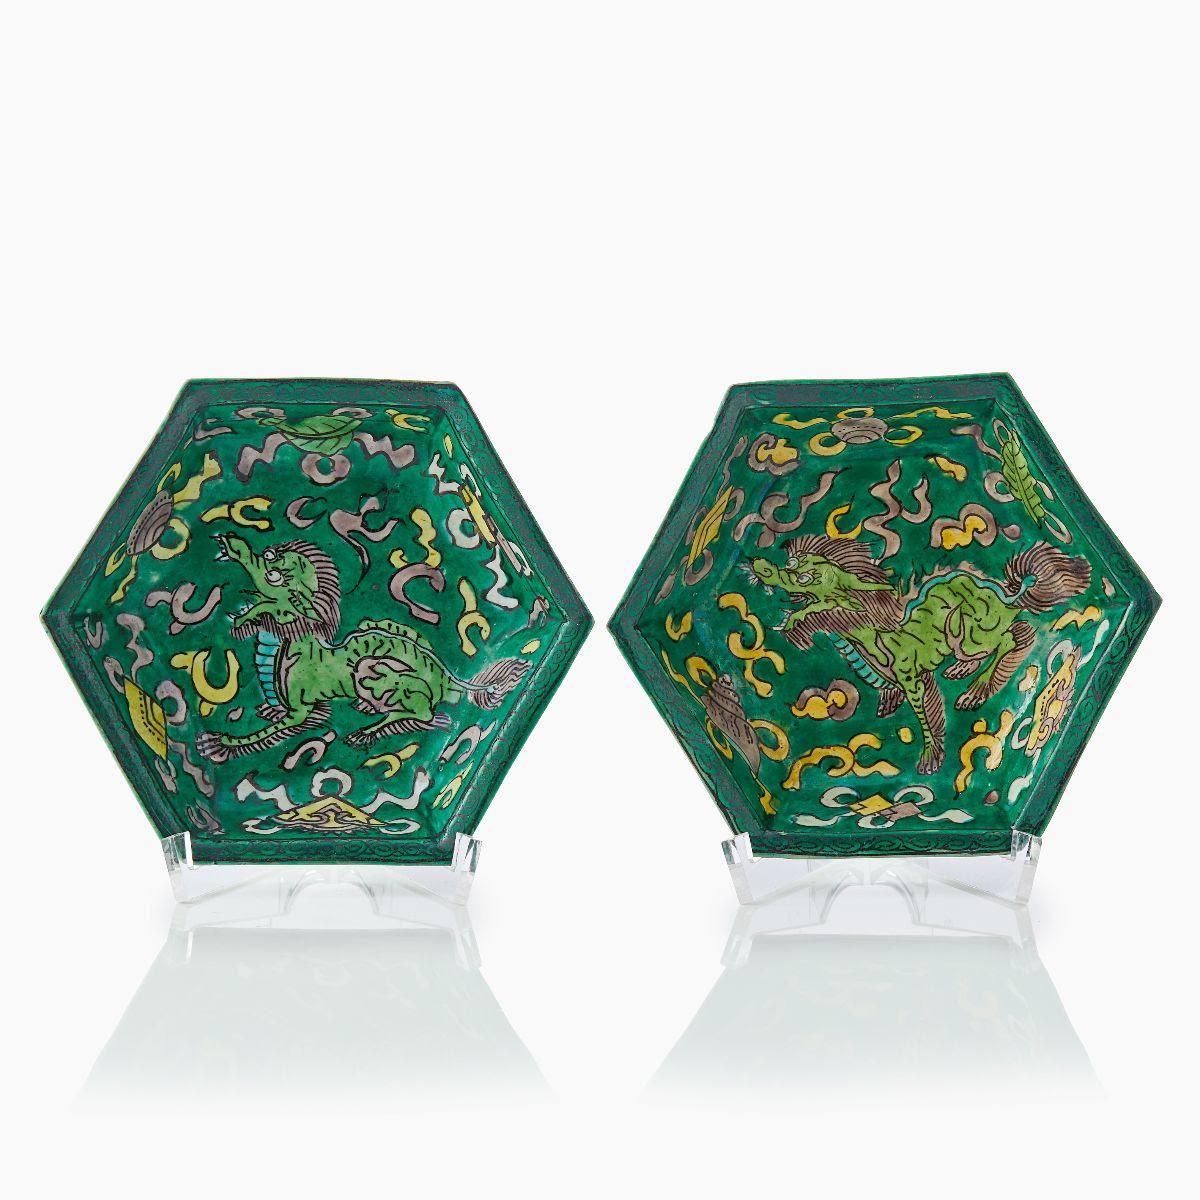 A Pair of Chinese Famille Verte Dishes